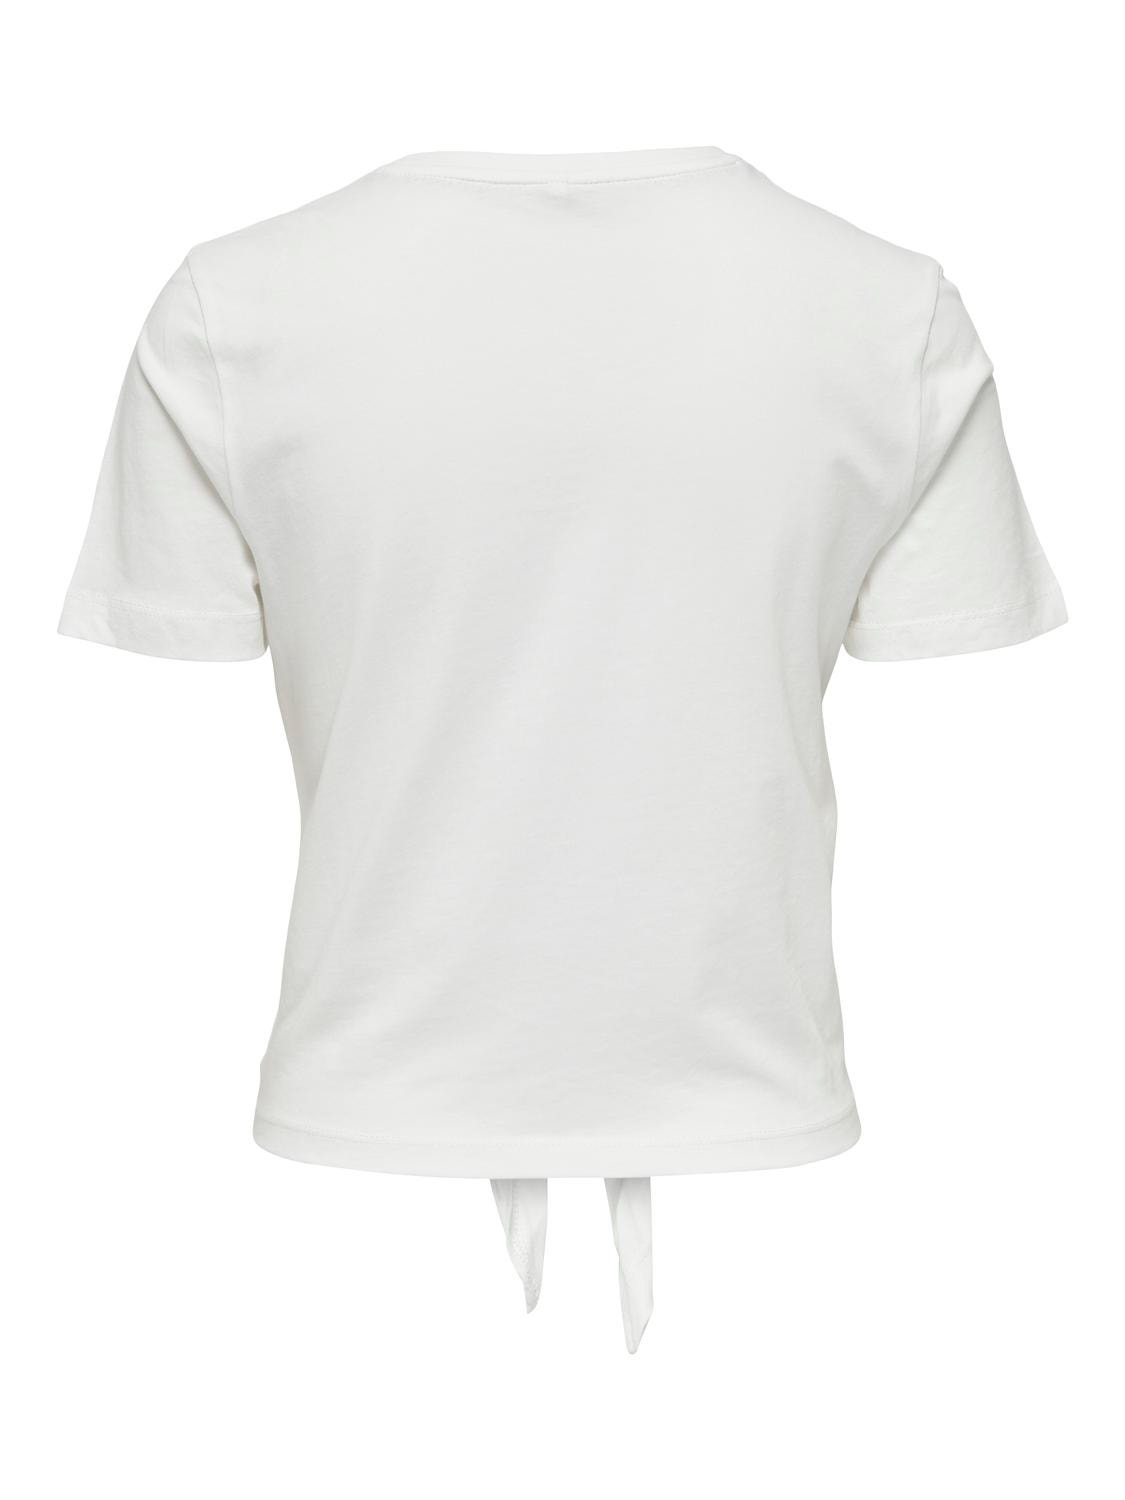 ONLY O-neck t-shirt with knot detail -Cloud Dancer - 15290571